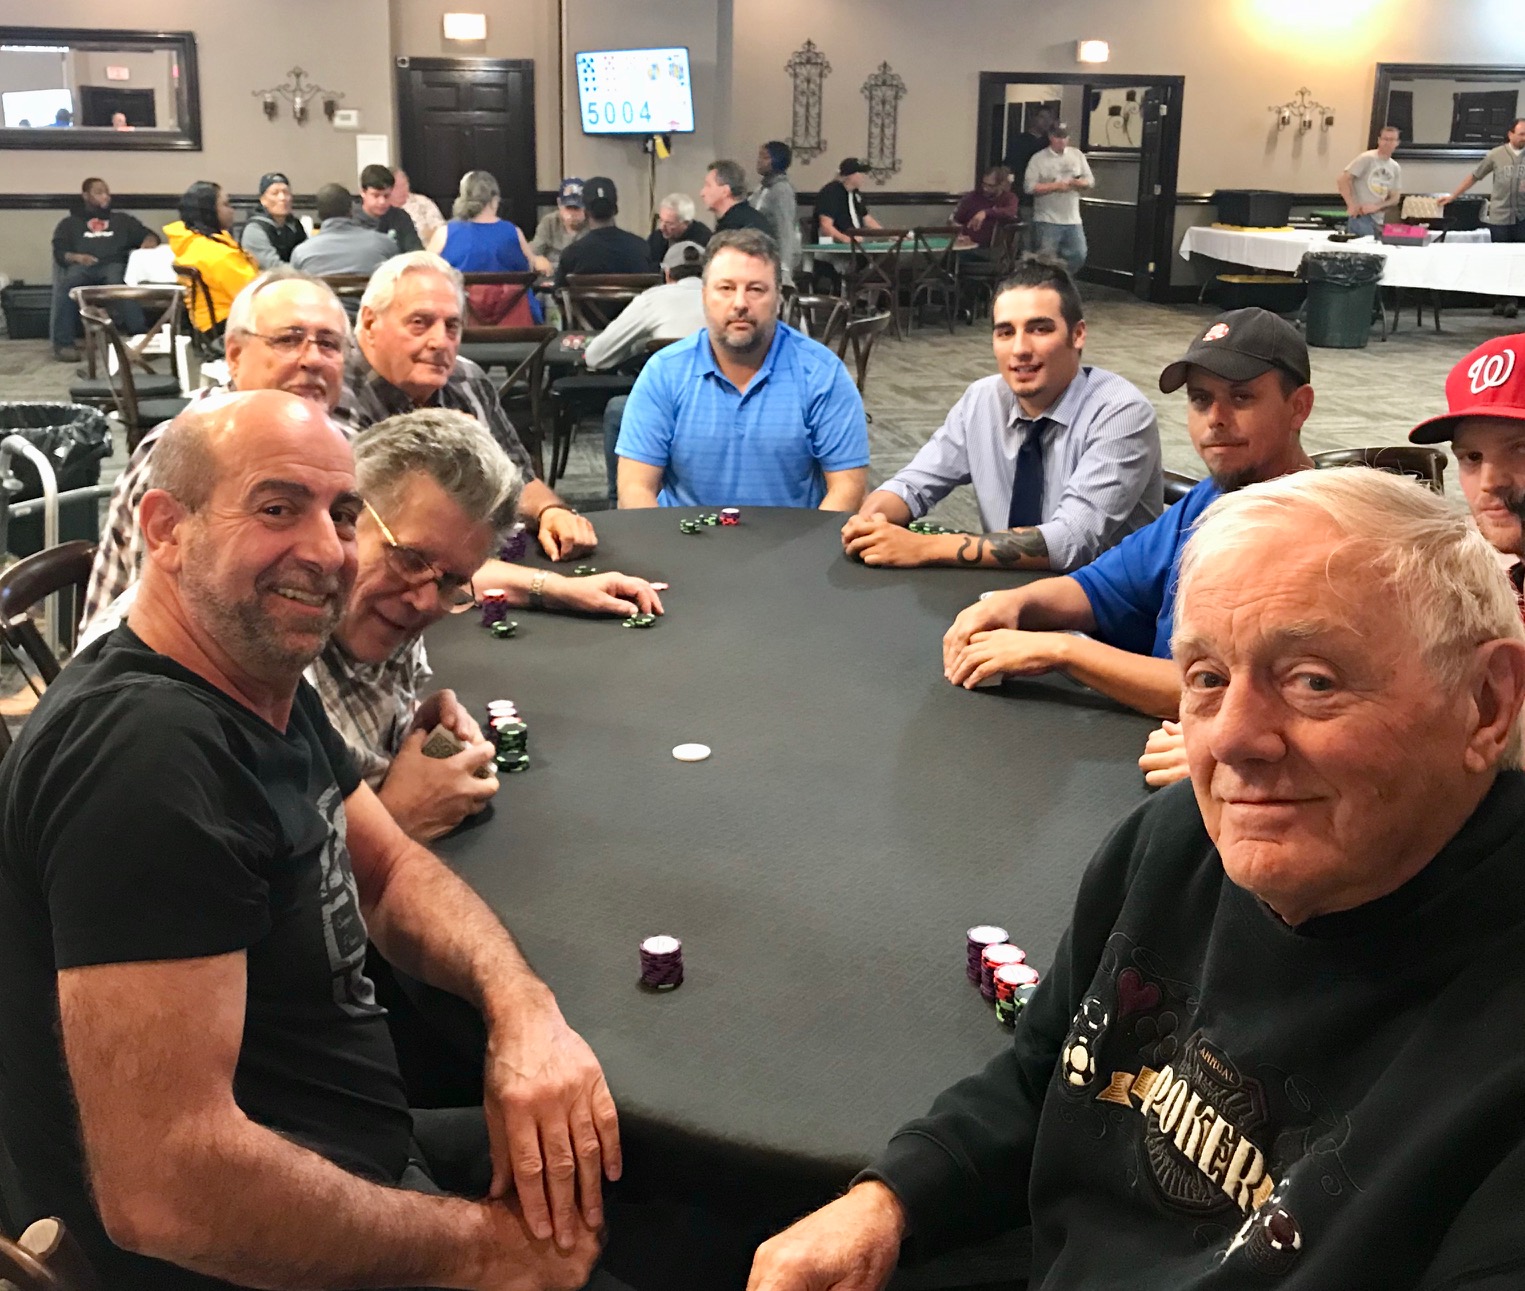 Poker Tournaments Near Me This Weekend